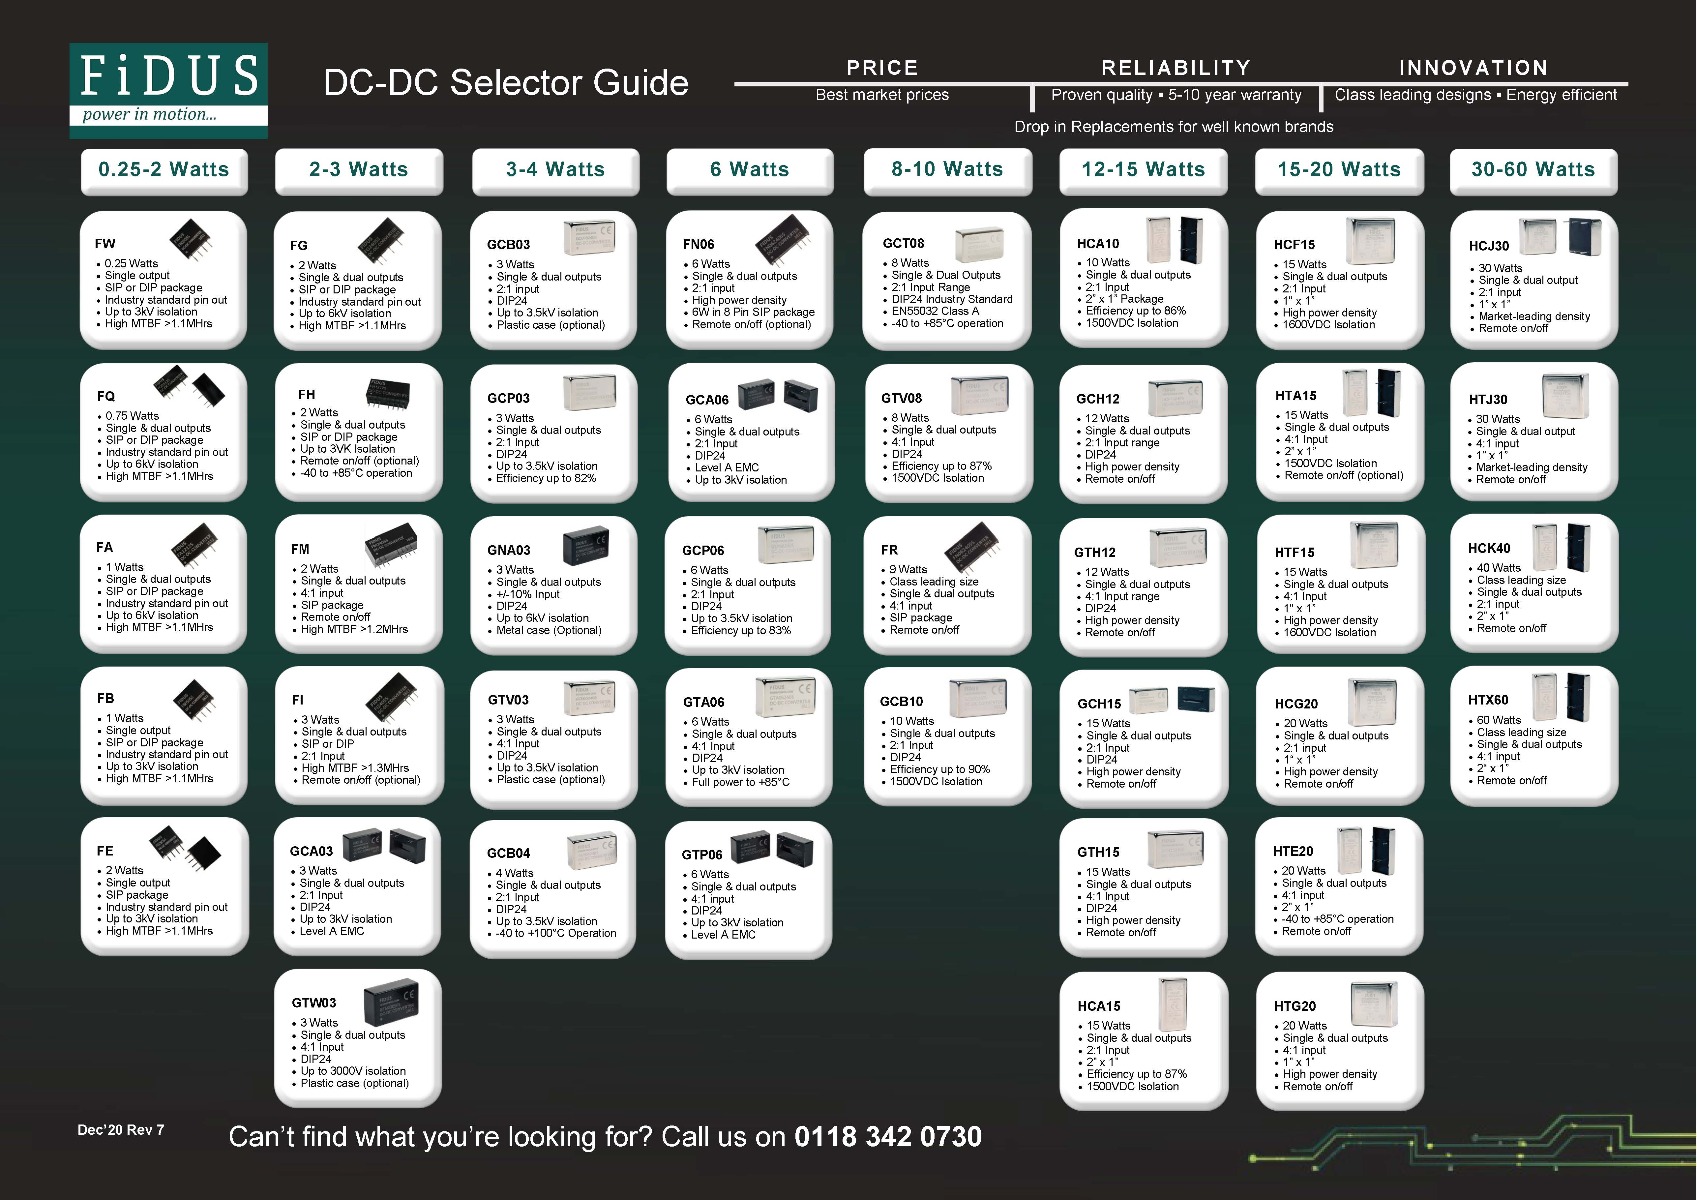 DC-DC selector guide